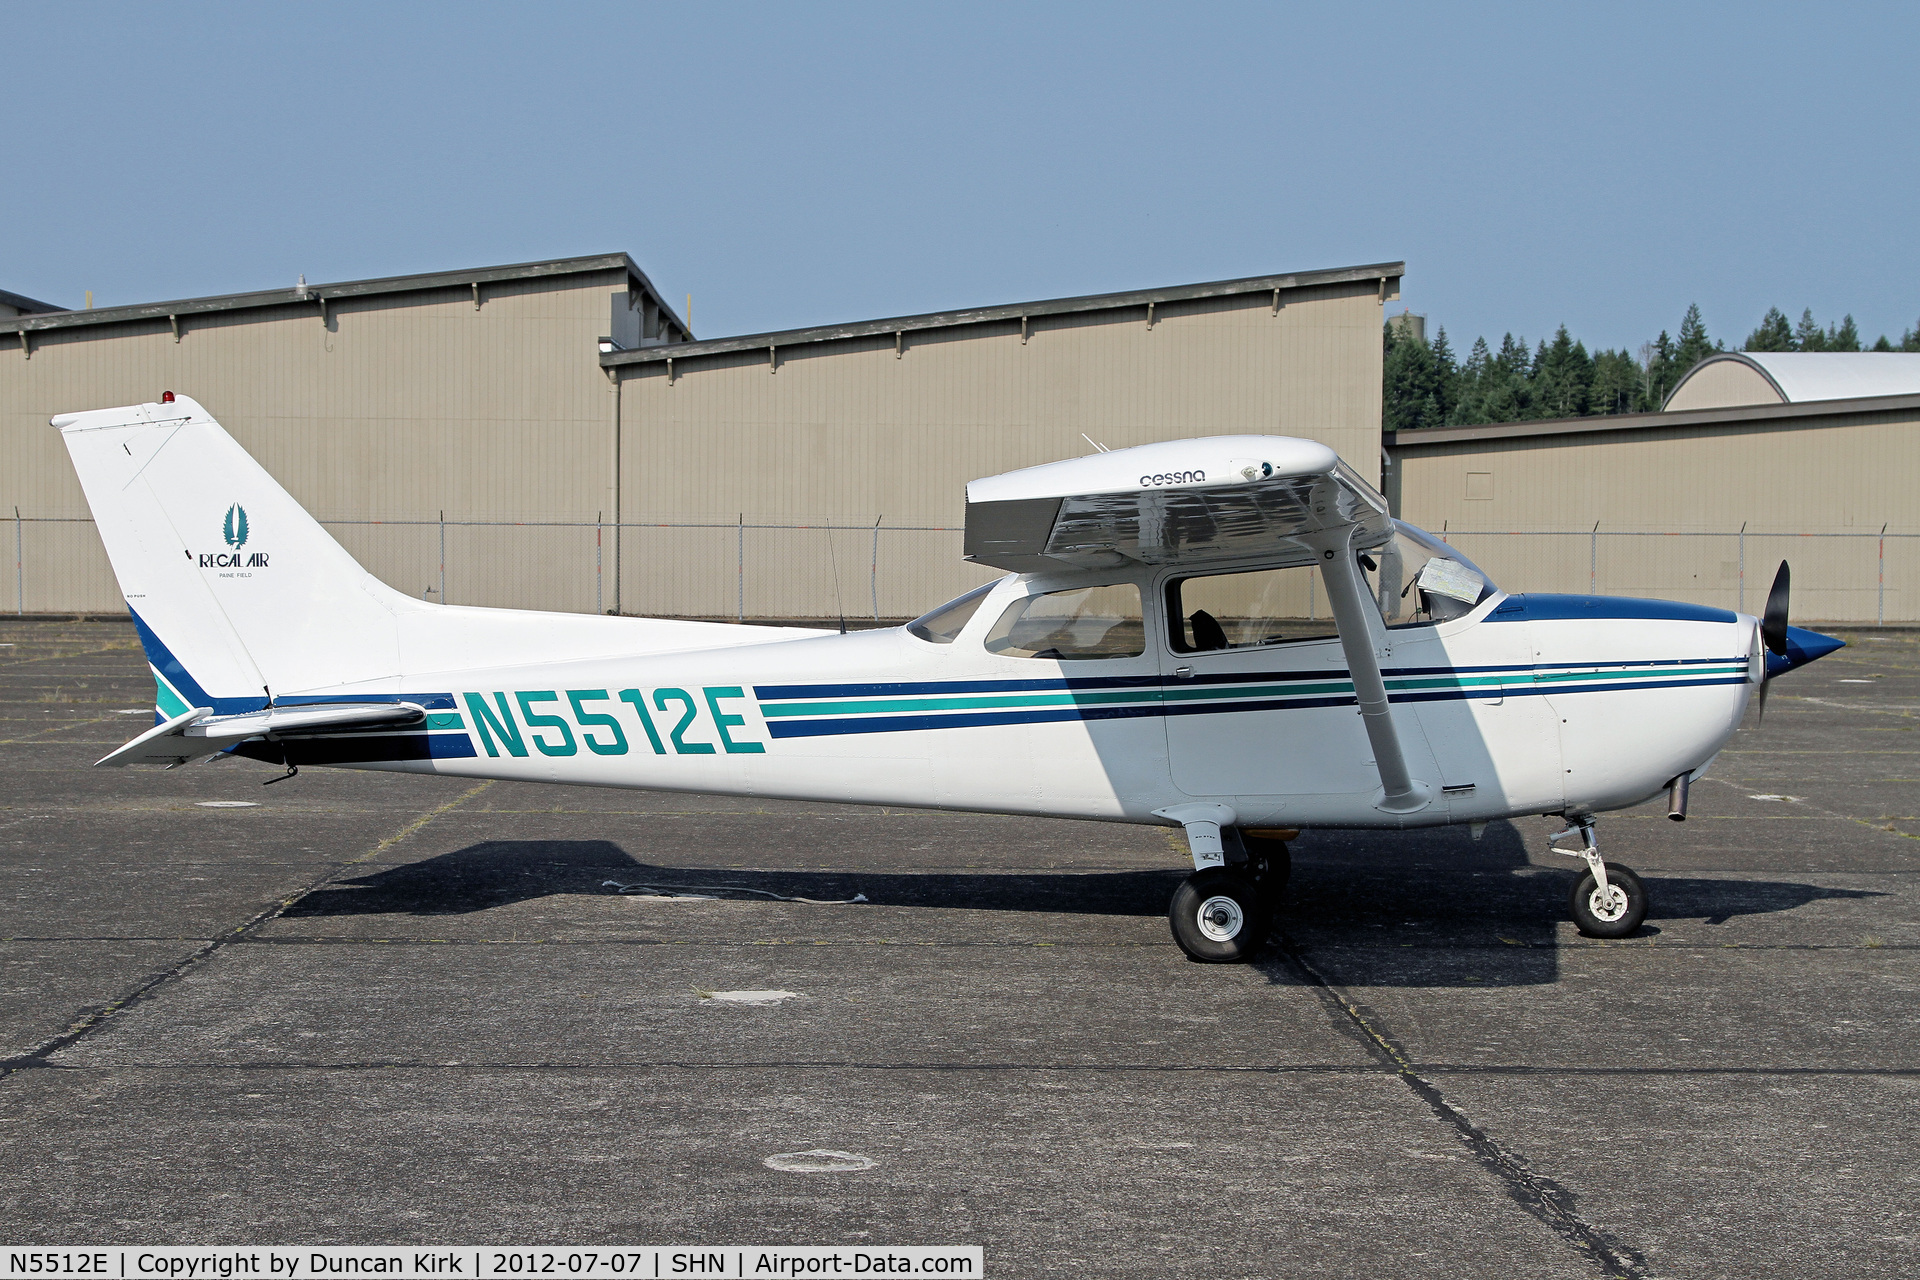 N5512E, 1978 Cessna 172N C/N 17271881, My plane at Shelton on the start of a nine airport tour